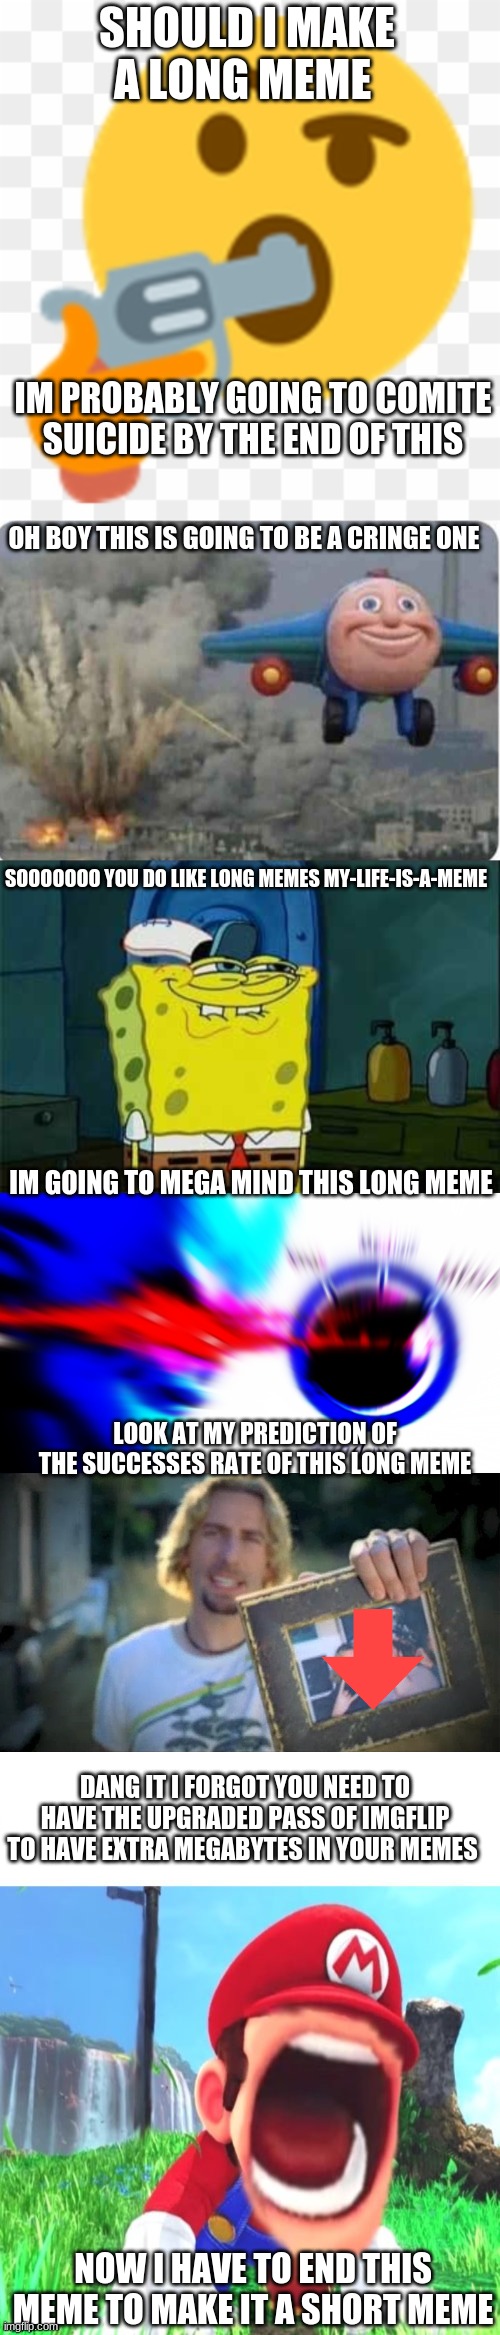 short meme | SHOULD I MAKE A LONG MEME; IM PROBABLY GOING TO COMITE SUICIDE BY THE END OF THIS; OH BOY THIS IS GOING TO BE A CRINGE ONE; SOOOOOOO YOU DO LIKE LONG MEMES MY-LIFE-IS-A-MEME; IM GOING TO MEGA MIND THIS LONG MEME; LOOK AT MY PREDICTION OF THE SUCCESSES RATE OF THIS LONG MEME; DANG IT I FORGOT YOU NEED TO HAVE THE UPGRADED PASS OF IMGFLIP TO HAVE EXTRA MEGABYTES IN YOUR MEMES; NOW I HAVE TO END THIS MEME TO MAKE IT A SHORT MEME | image tagged in the thinking suicide emoji,flying thomas the train,spongebob soooo,mega mind size,look at this photograph,mario screaming | made w/ Imgflip meme maker